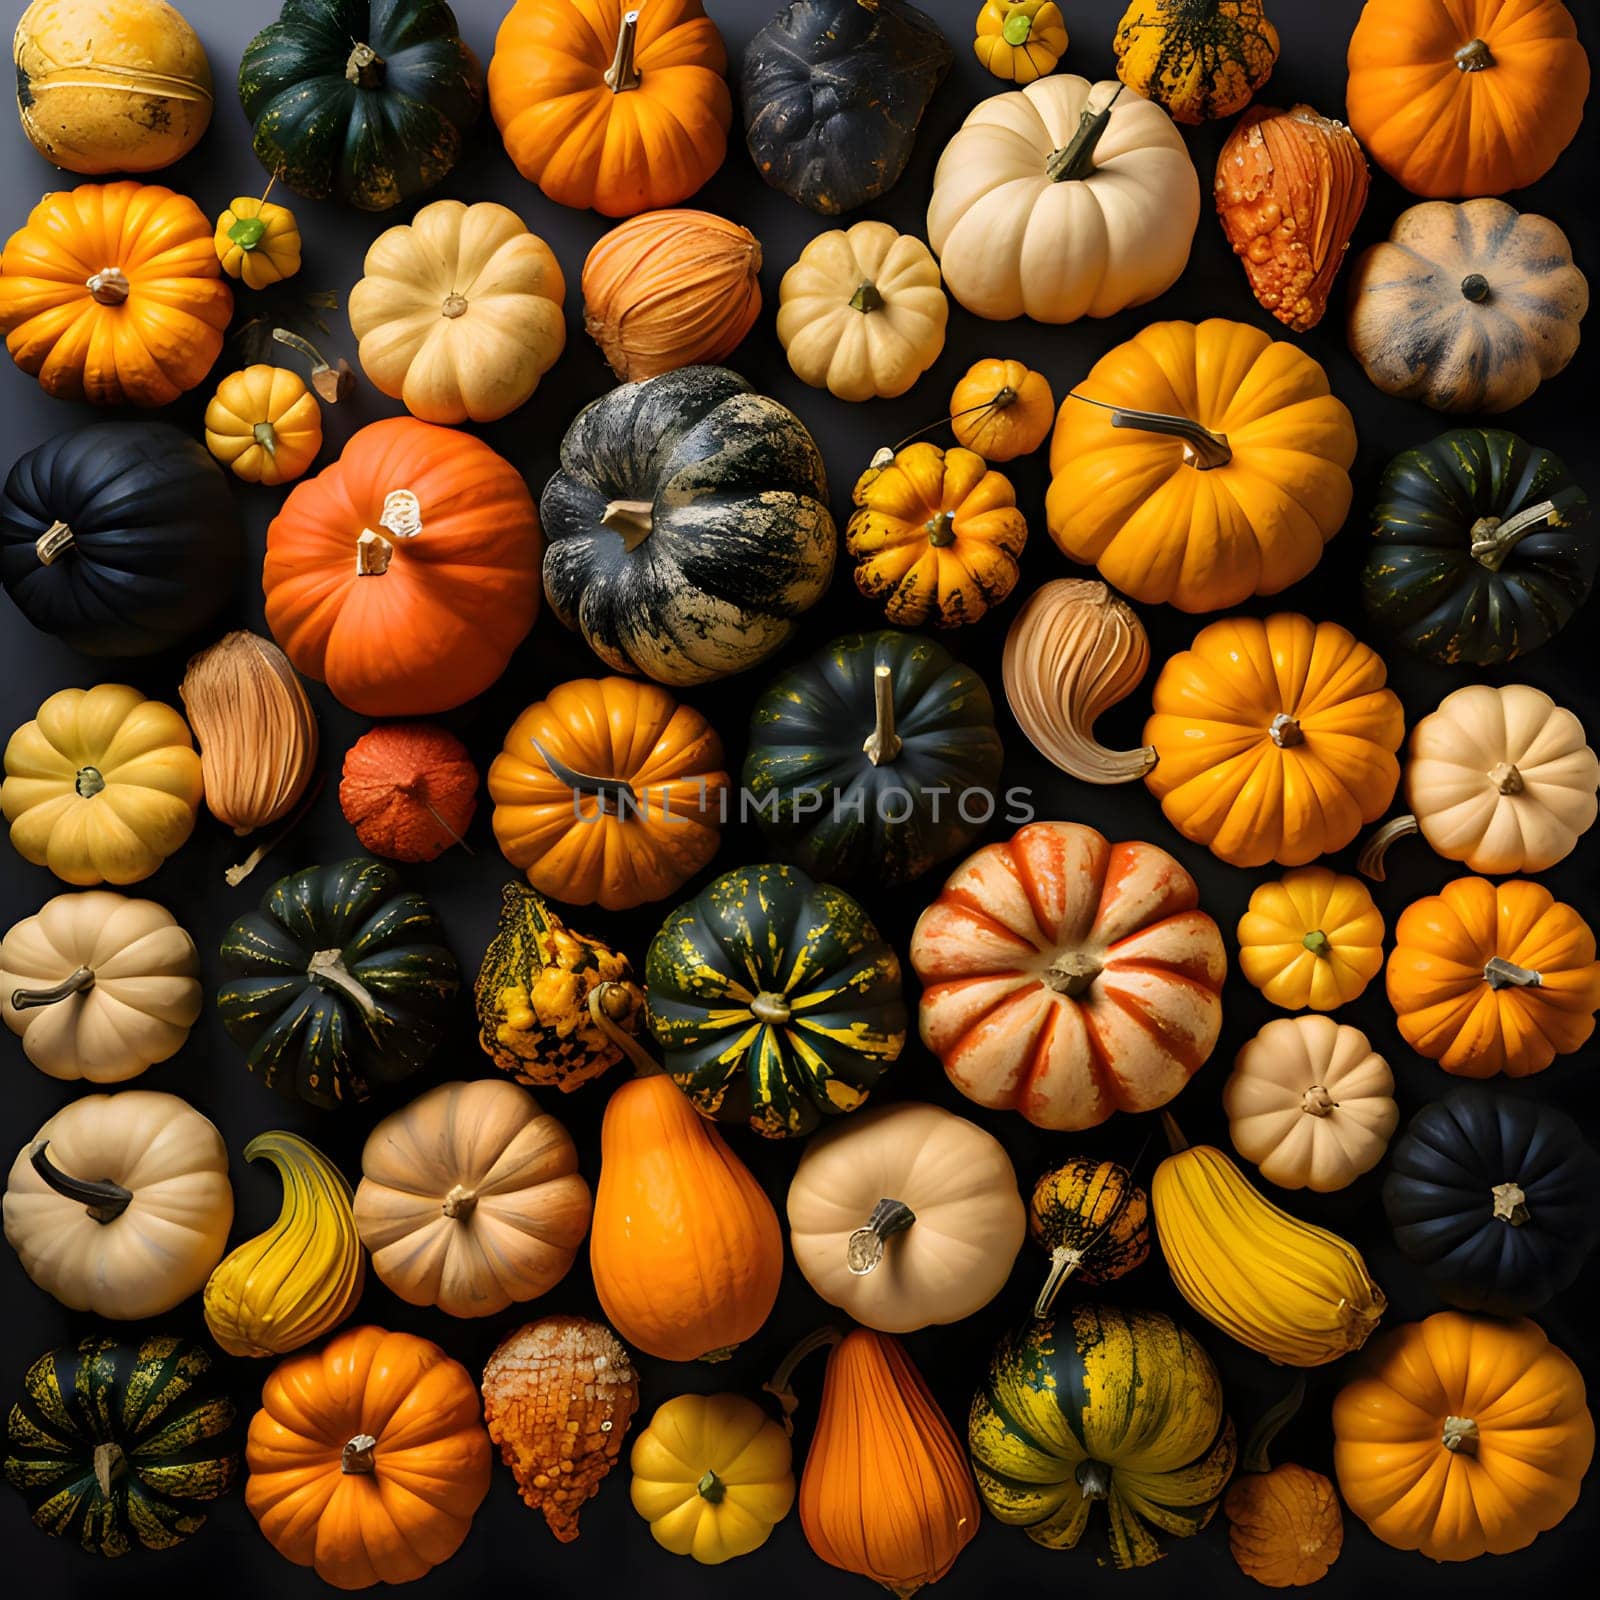 An aerial view of colorful pumpkins, on dark boards. Pumpkin as a dish of thanksgiving for the harvest. An atmosphere of joy and celebration.